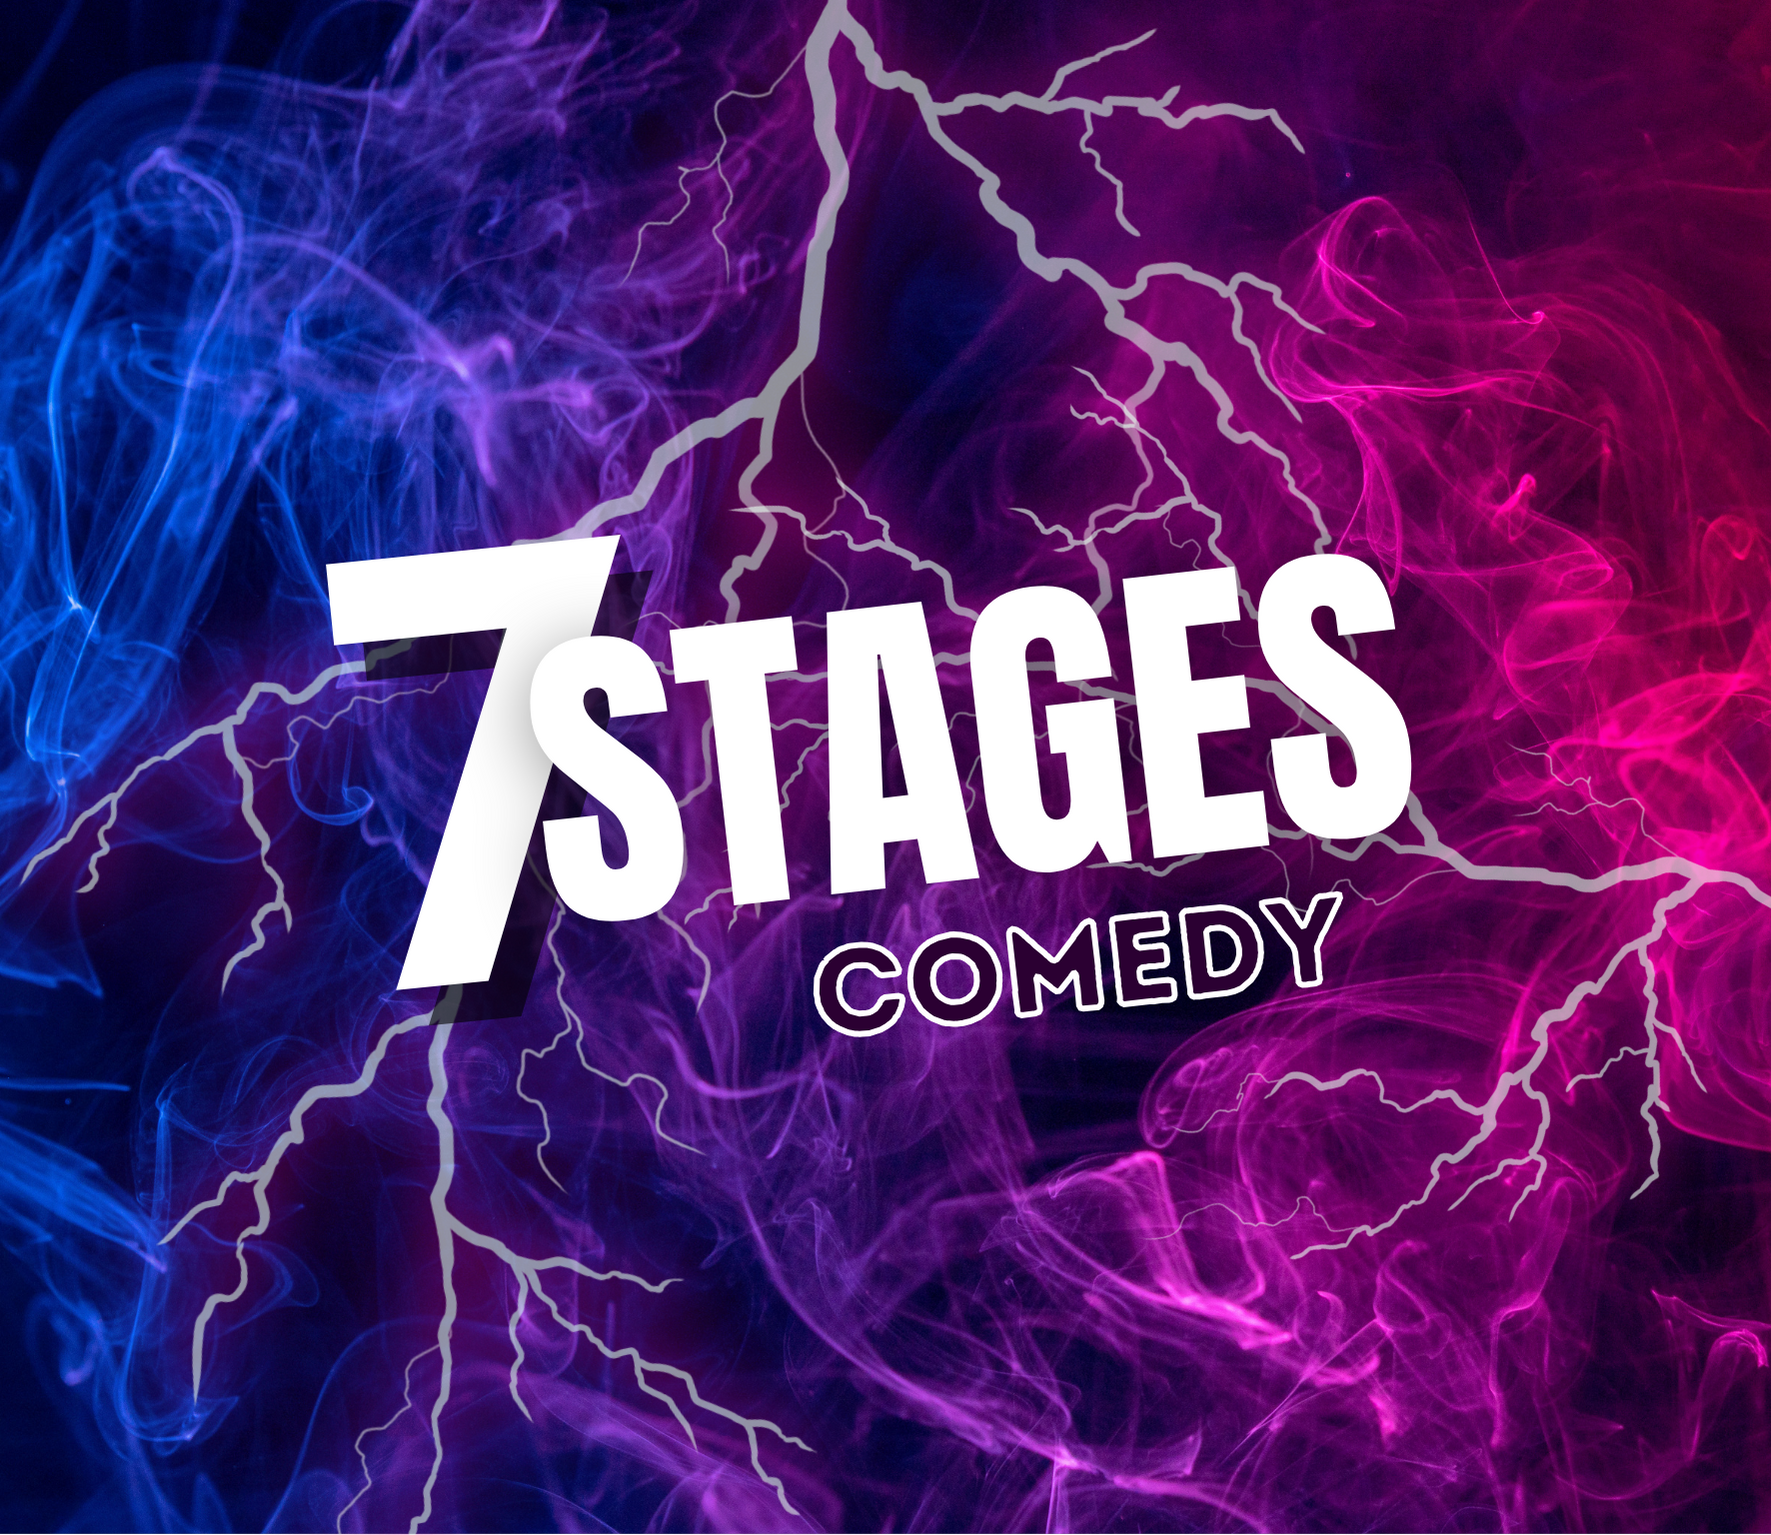 7 Stages Logo